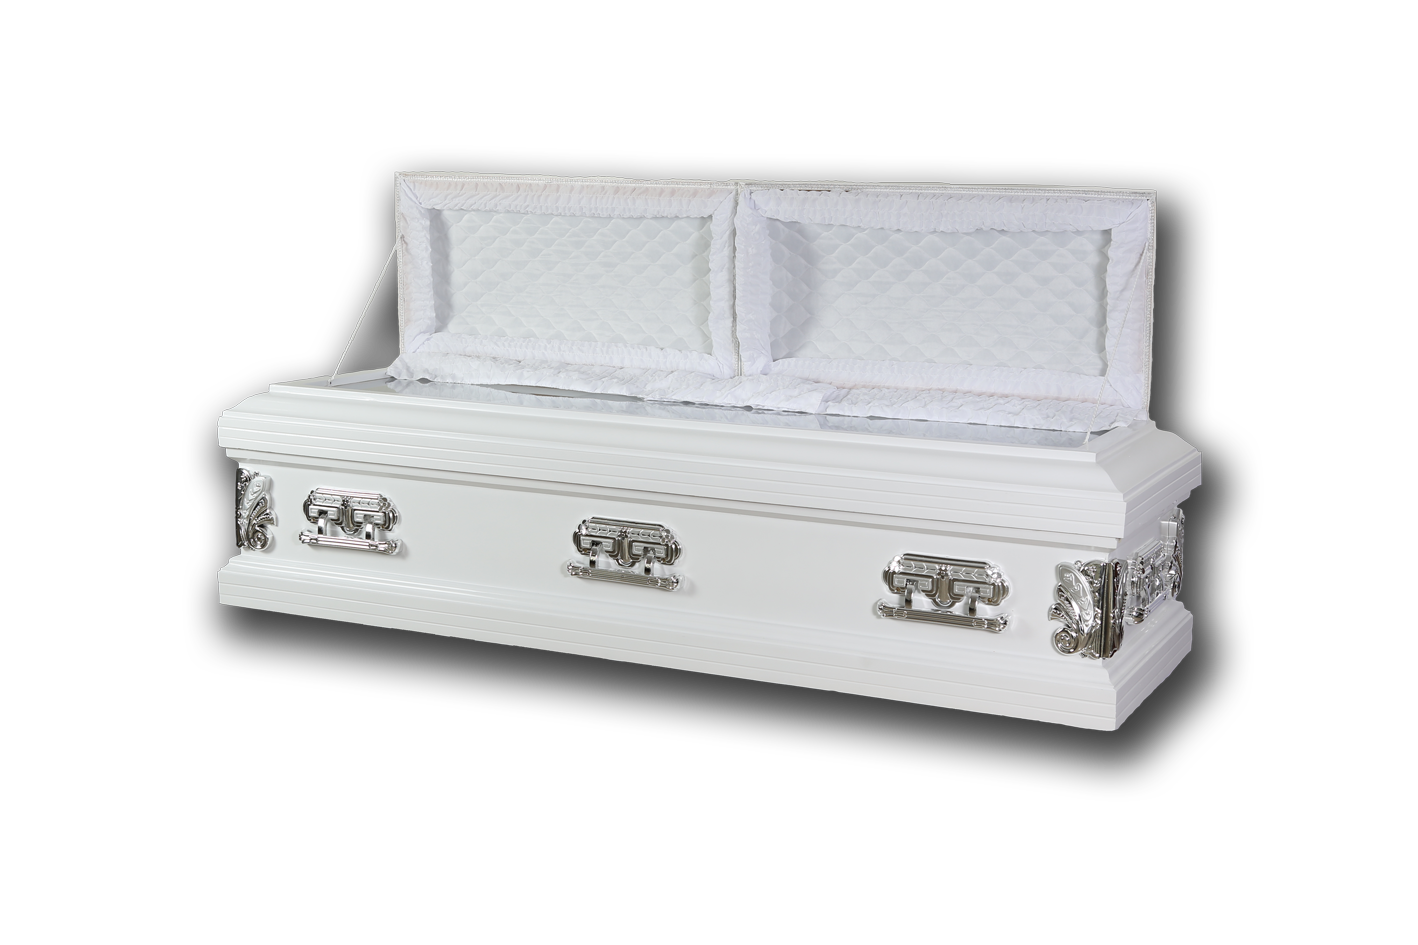  Included casket from ST. GEORGE traditional pre-need plan from St Peter Life plan